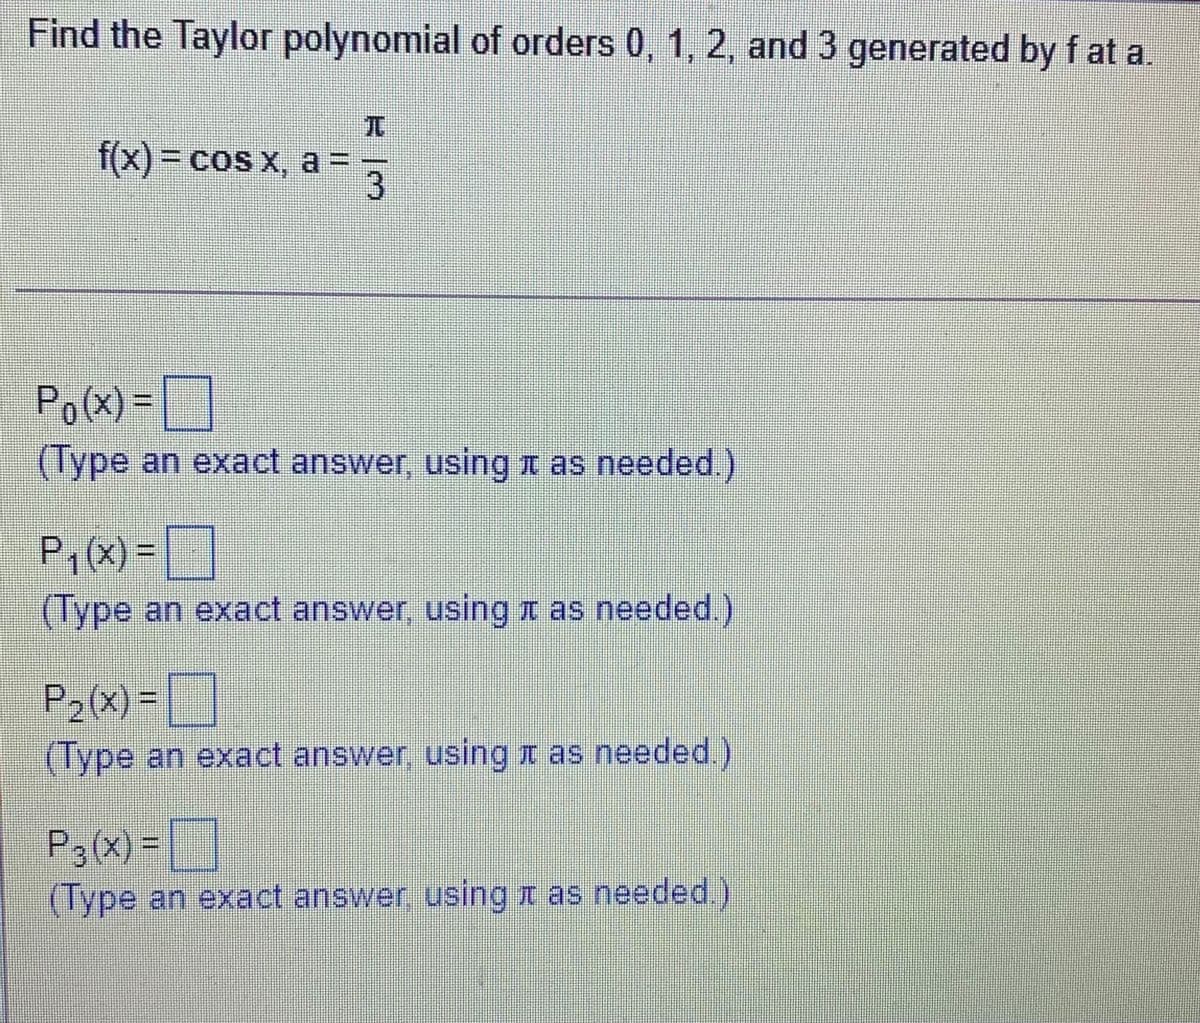 Find the Taylor polynomial of orders 0, 1, 2, and 3 generated by f at a
f(x)3D cos x, a = =
3
Po(x) =
(Type an exact answer, using n as needed.)
Pi(X) =
(Type an exact answer, usingr as needed.)
P2(x) =
(Type an exact answer, usingr as needed.)
P3(X) =
(Type an exact answer, using z as needed.)
